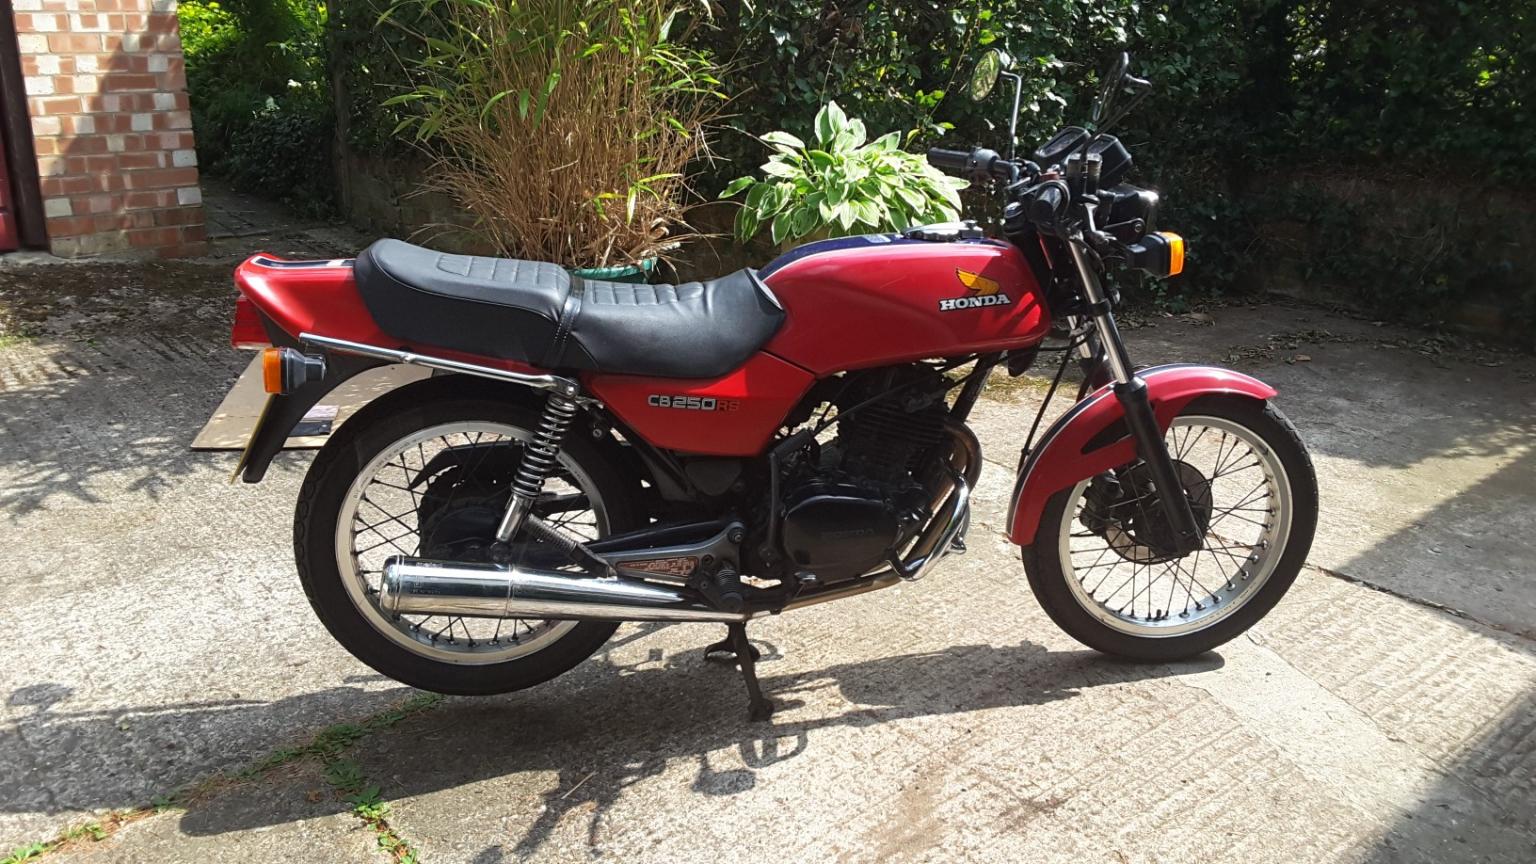 honda cb 250 rs 1981 in WR10 Wychavon for £1,000.00 for sale | Shpock